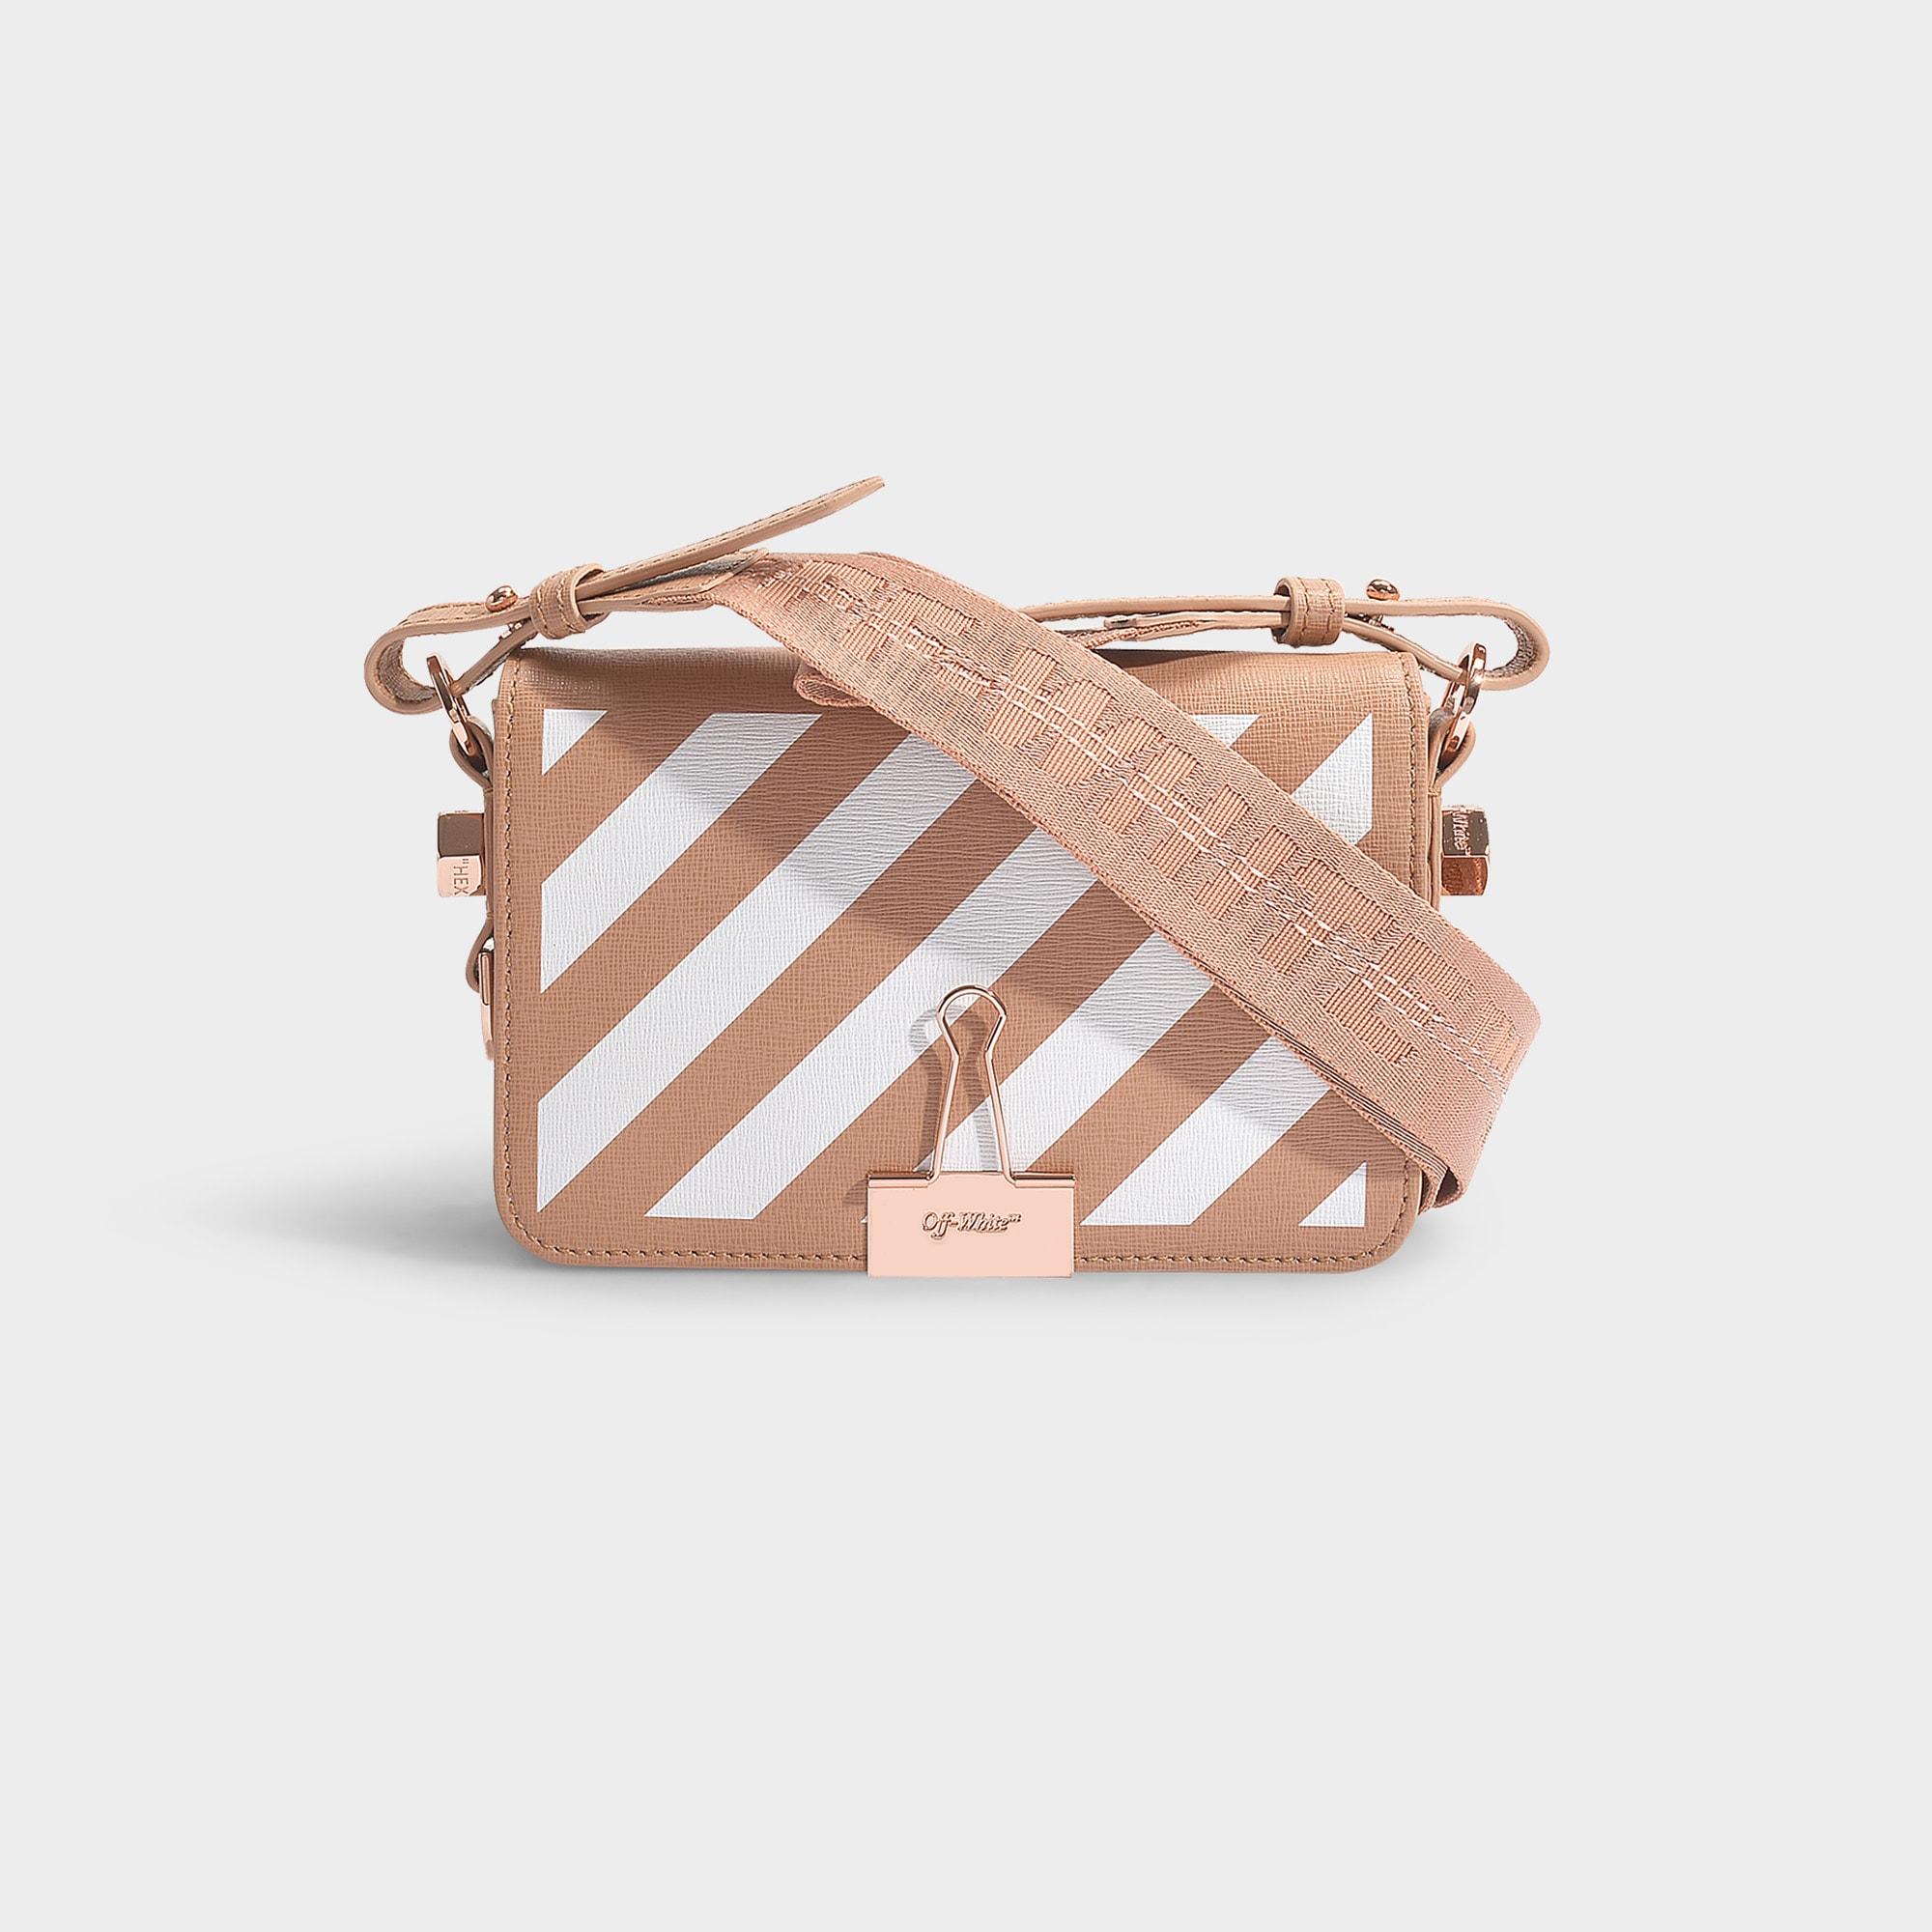 Off-White c/o Virgil Abloh Diag Mini Flap Bag In Nude And White Calfskin in  Pink